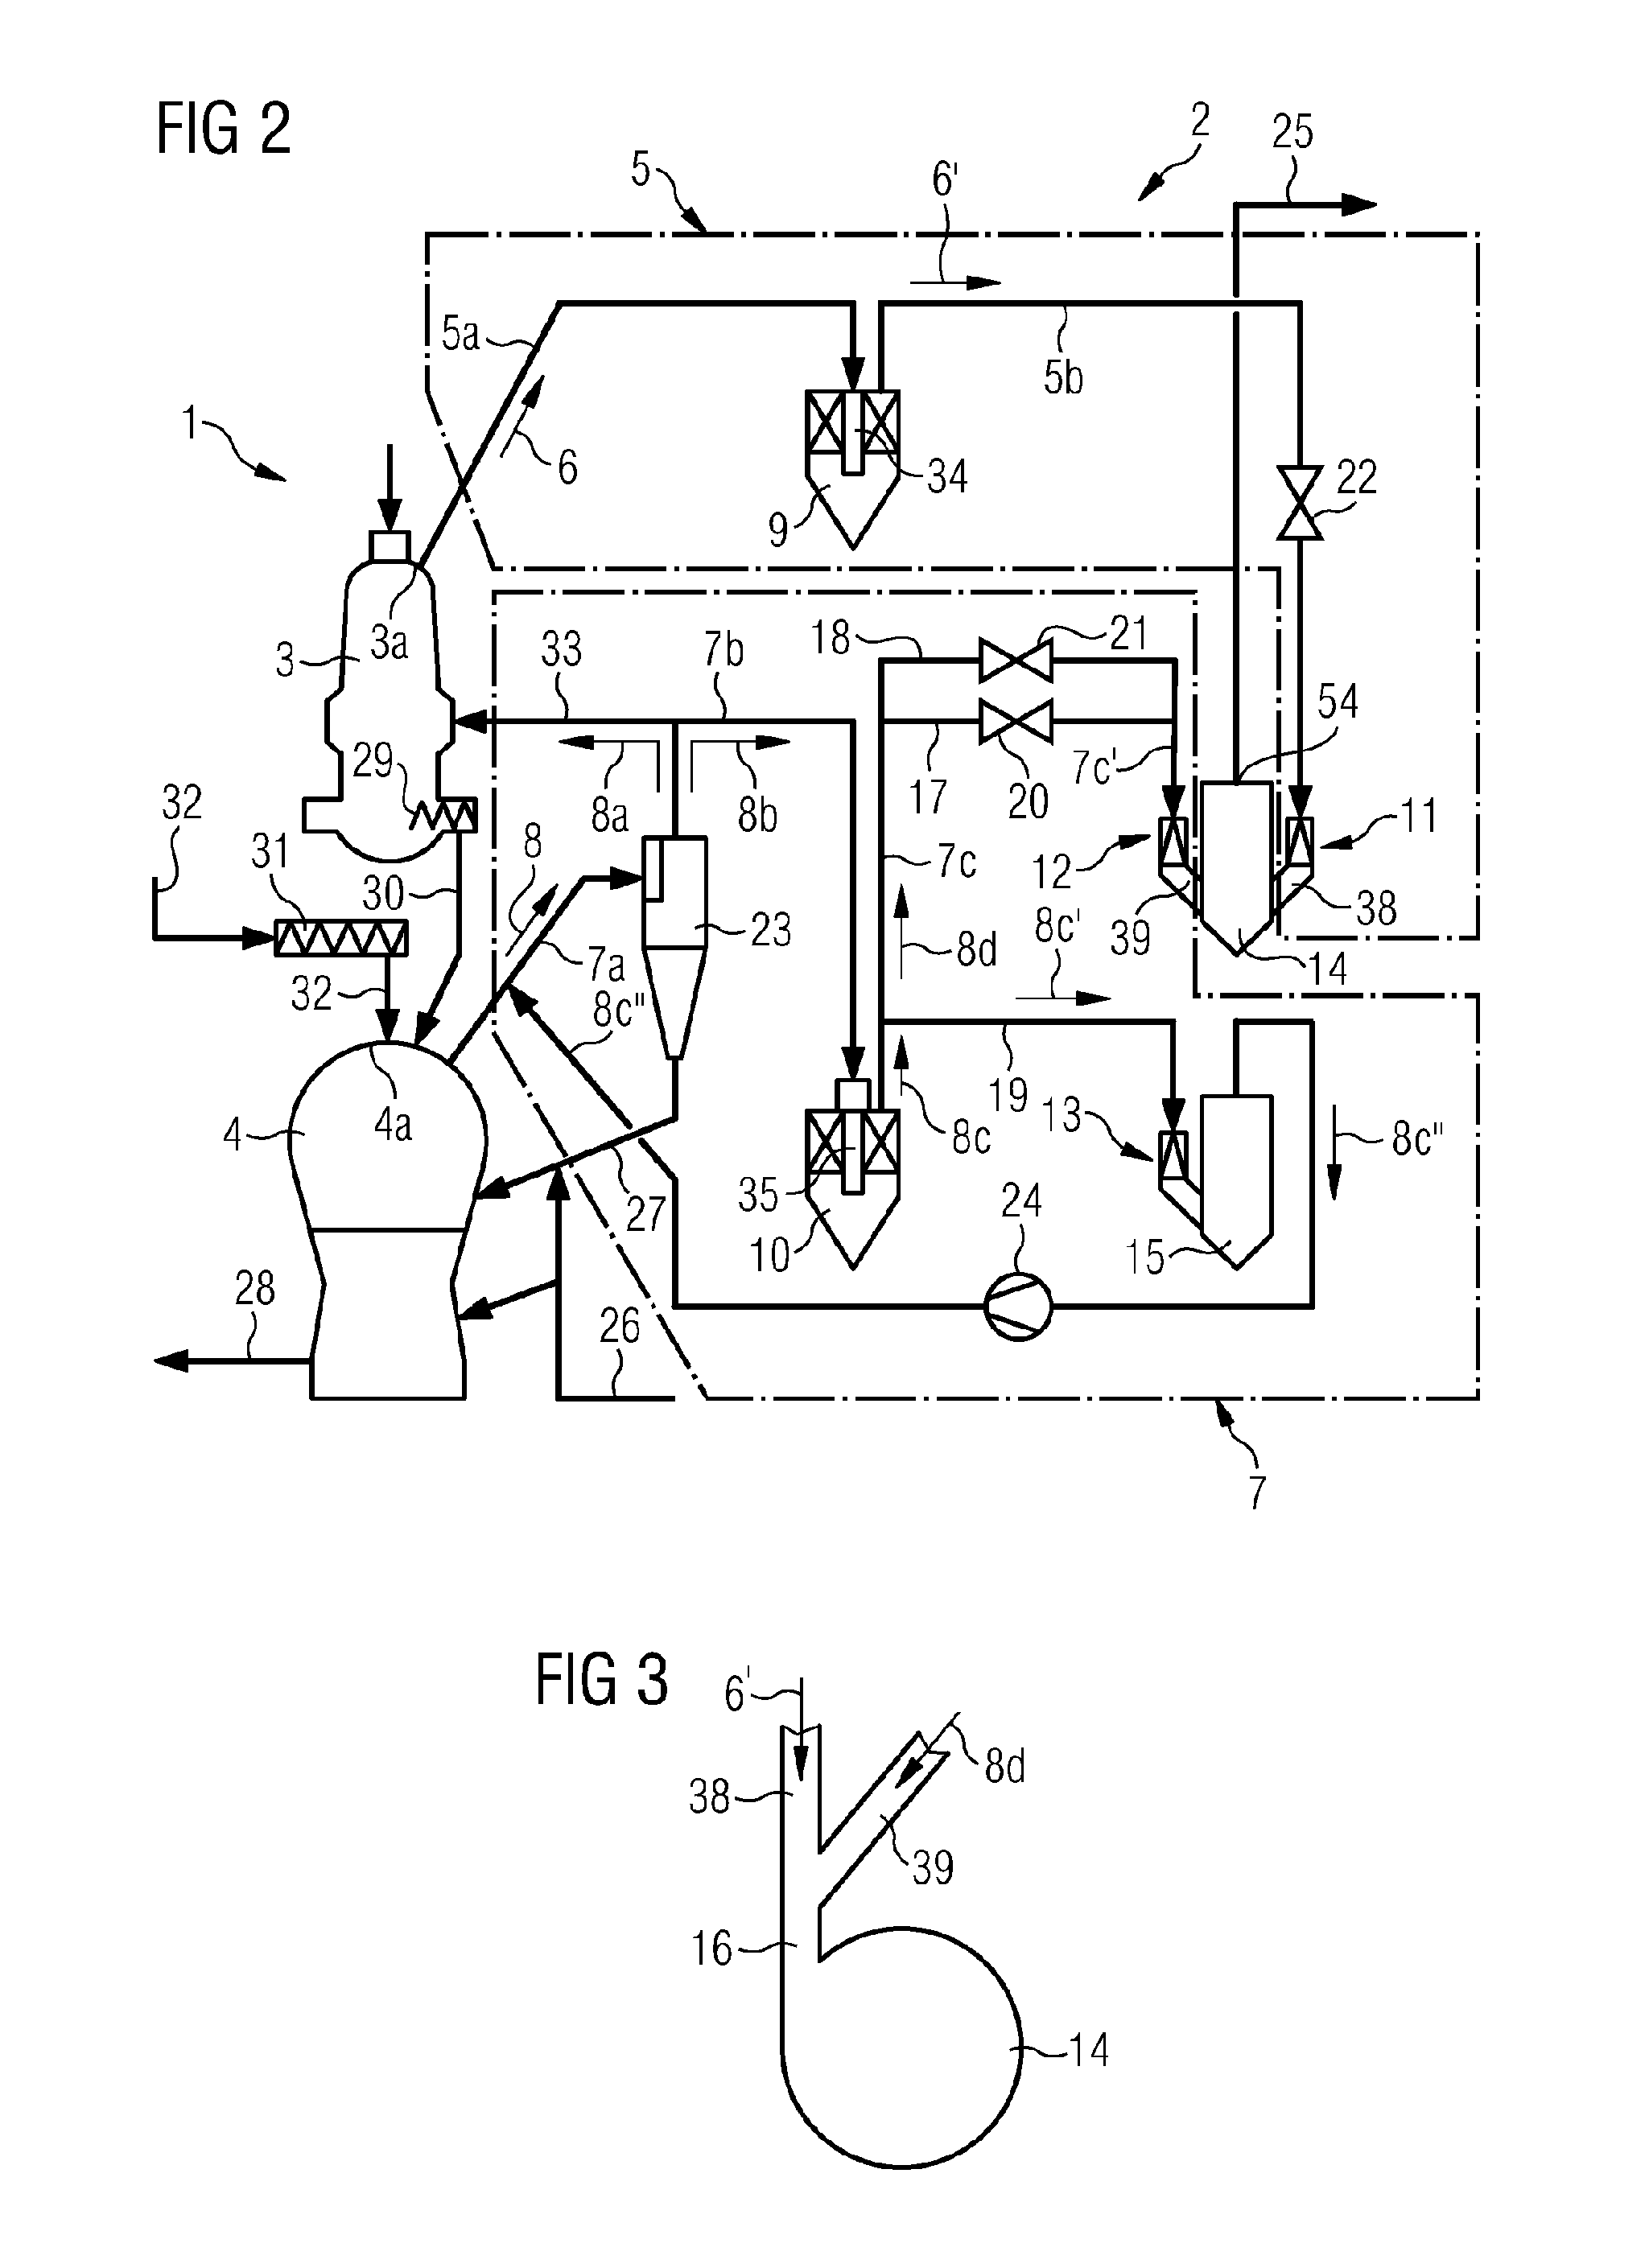 Process gas purification device for a melt reduction system for extracting pig iron